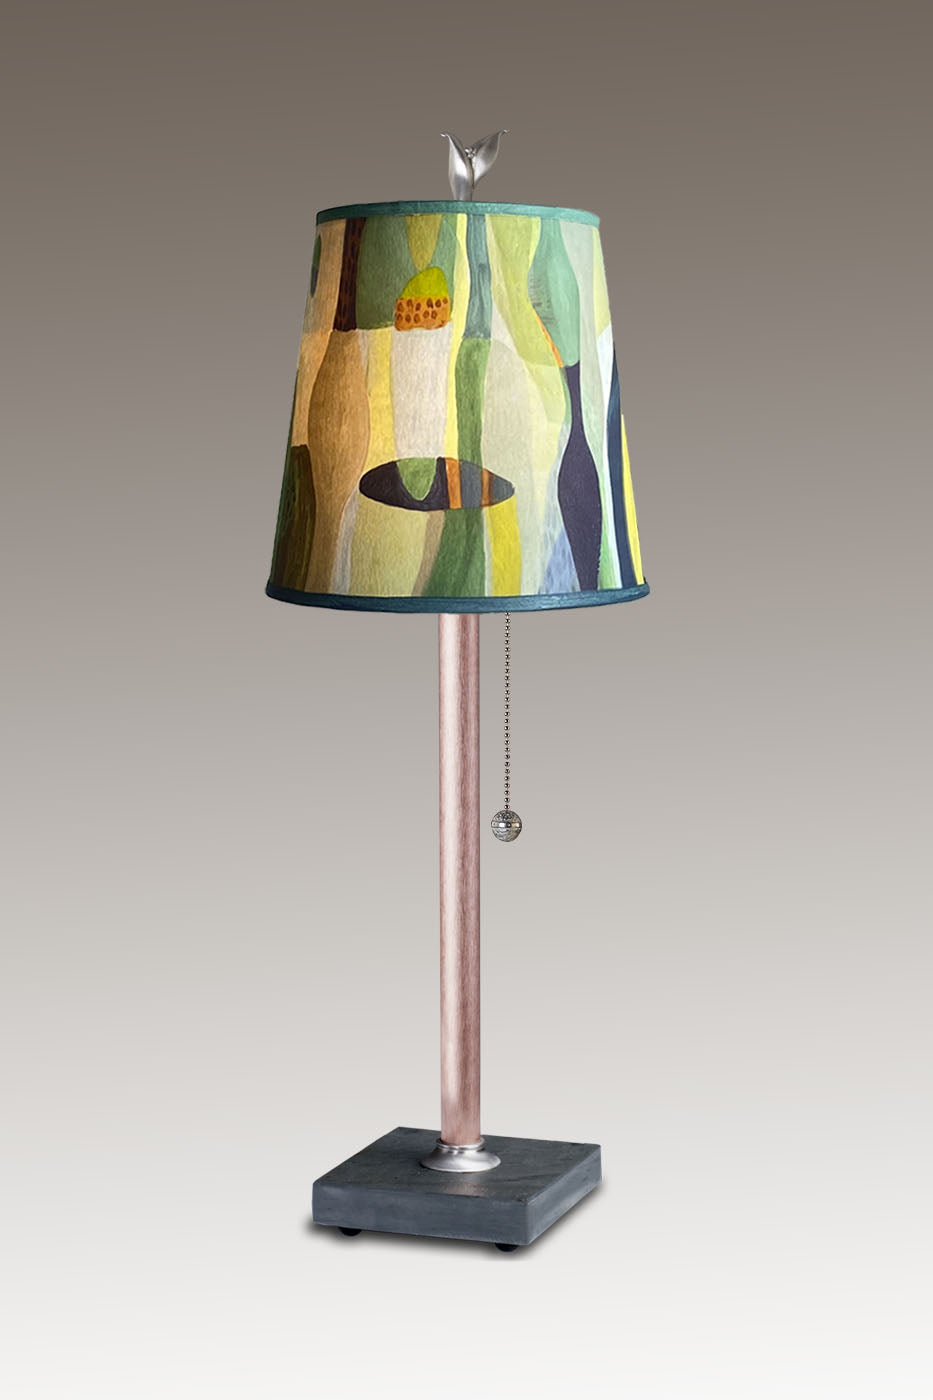 Copper Table Lamp with Small Drum Shade in Riviera in Citrus